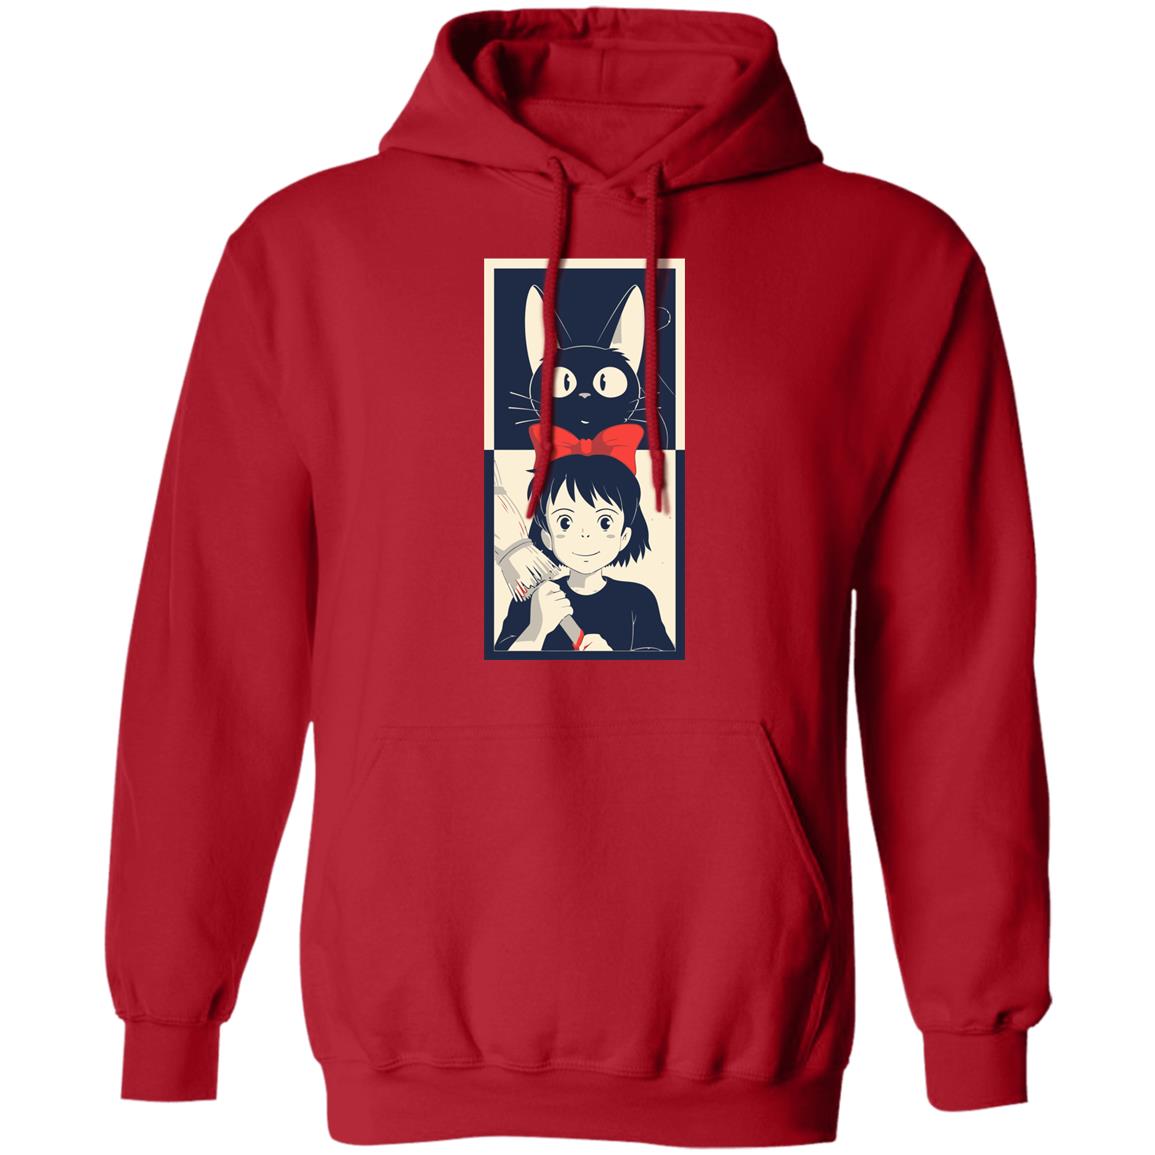 Kiki’s Delivery Service Hoodie Unisex White S